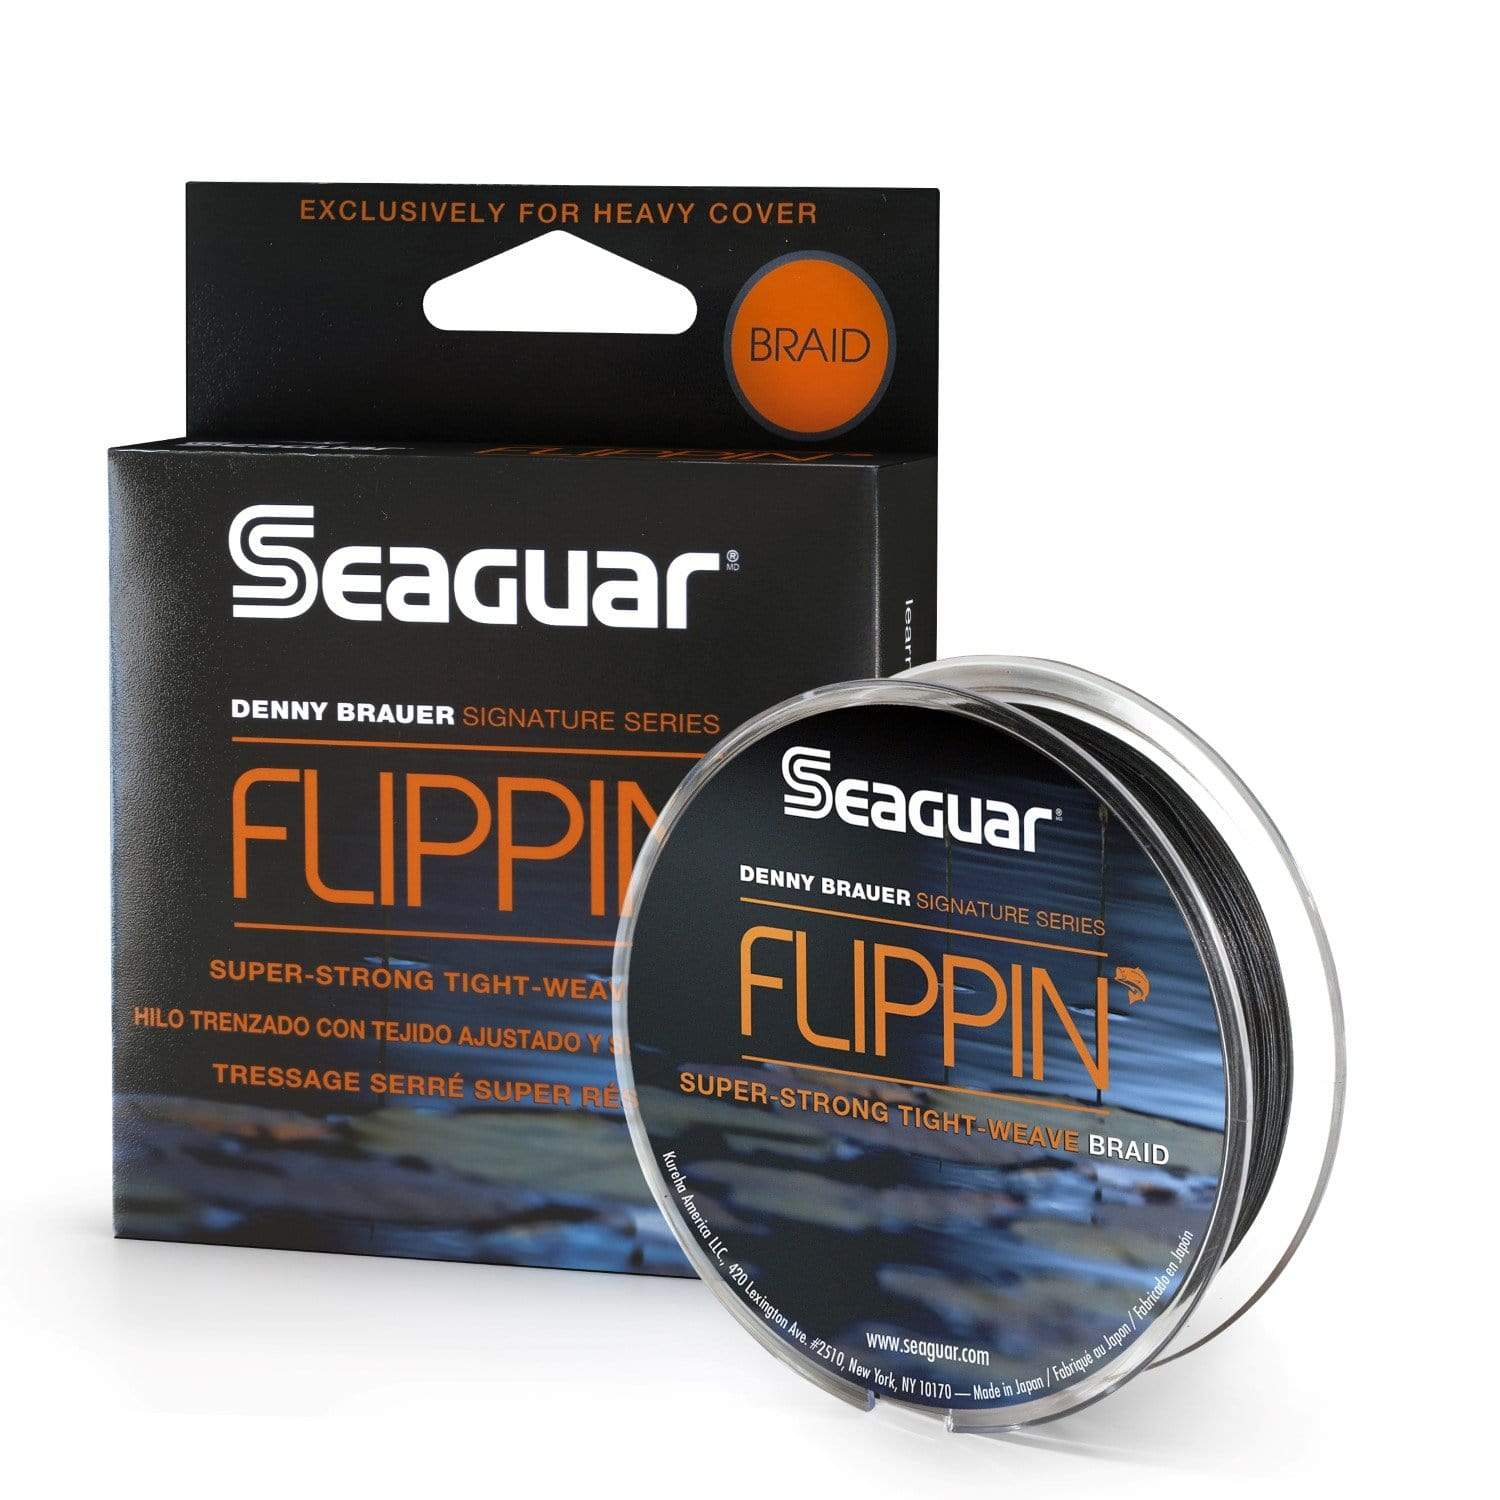 Seaguar Denny Brauer FlippiN Braid 50 Lb Test Fishing Line – Recreation  Outfitters